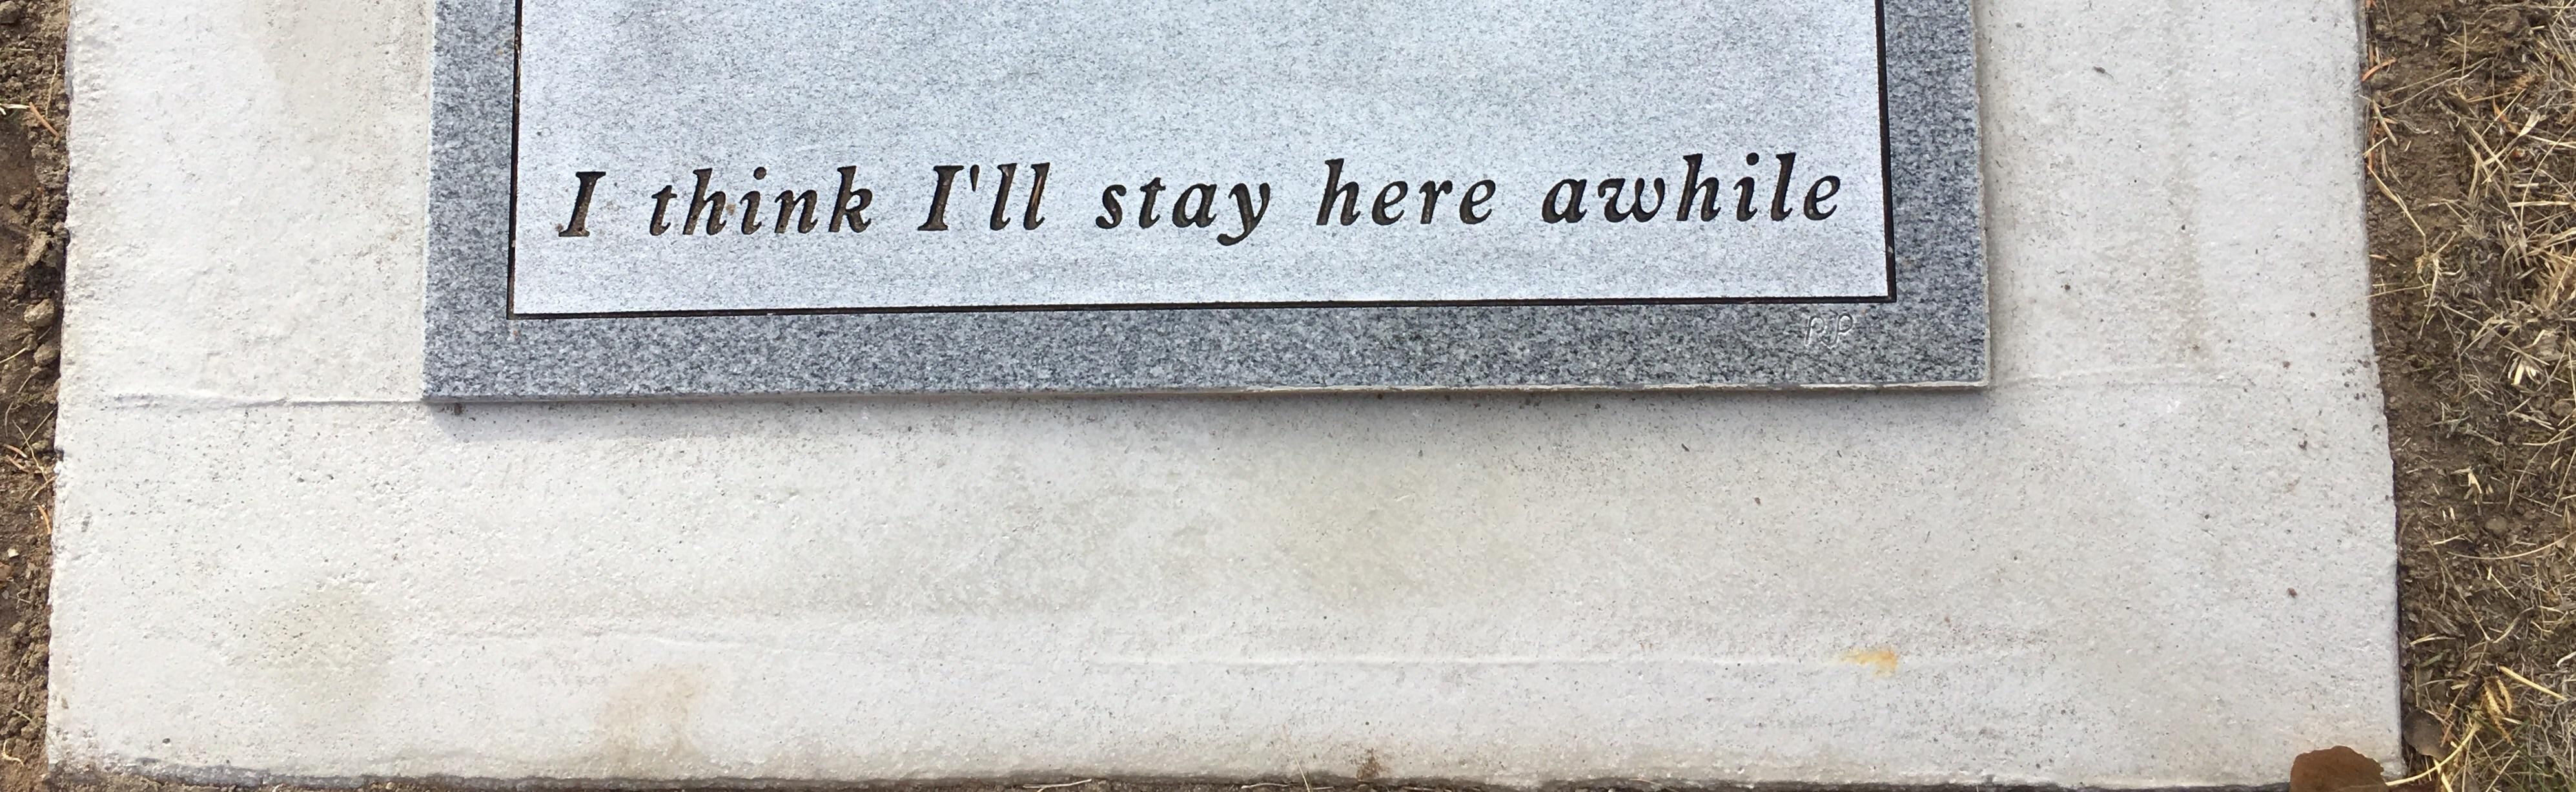 Since we're doing funny headstones, this is my dad's inscription.